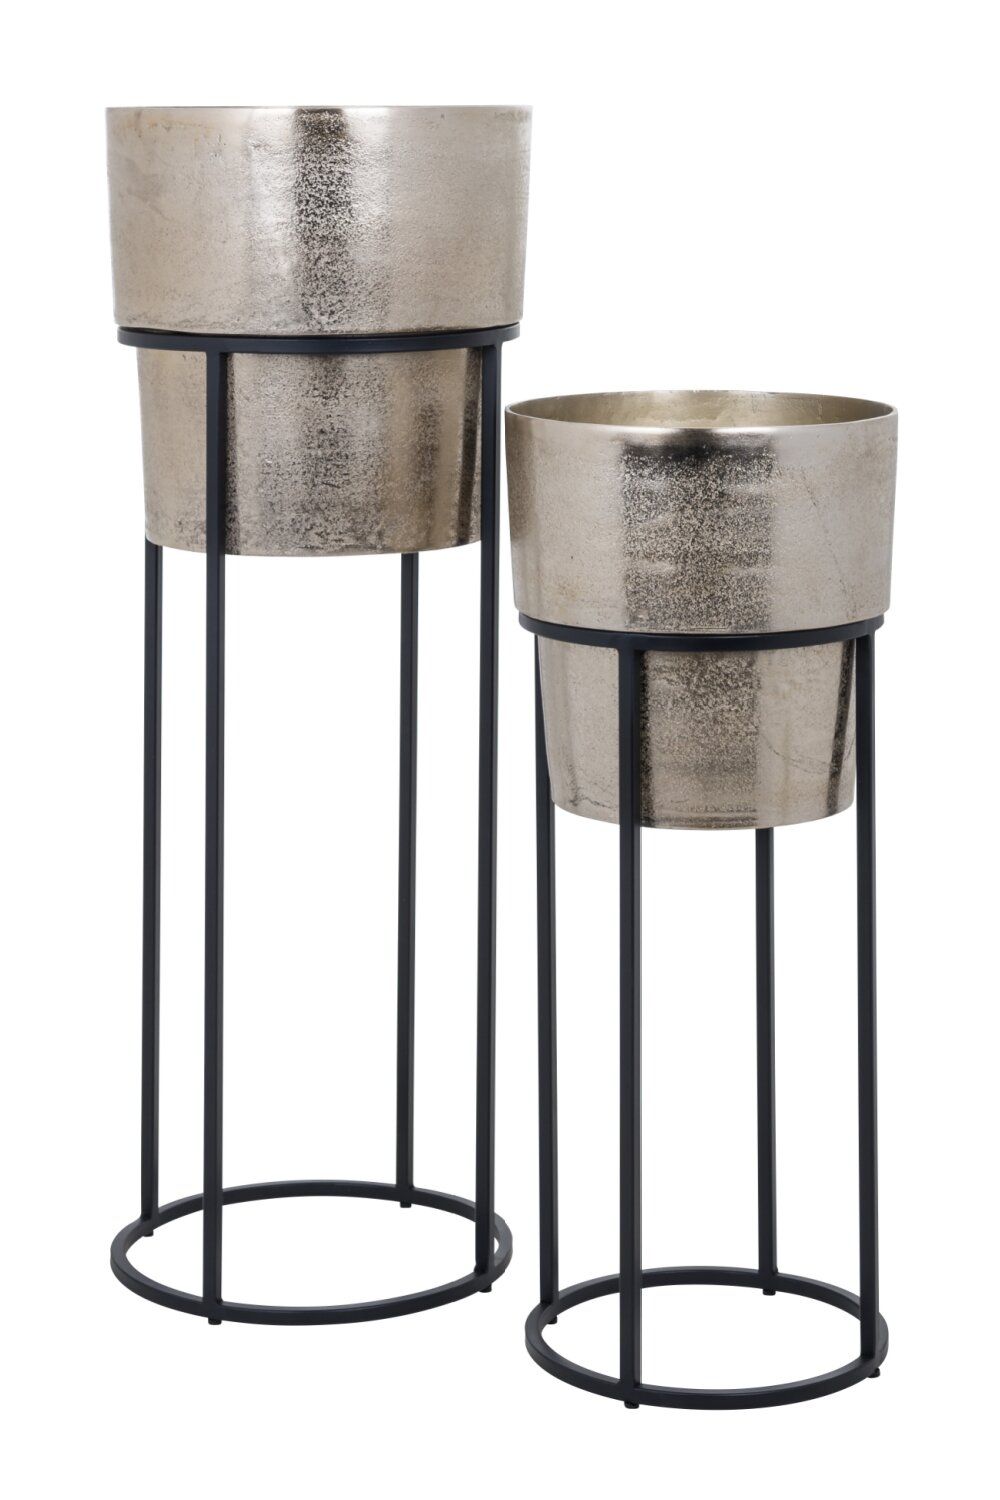 Oroa Round Pedestal Plant Stand | Wayfair In Iron Base Plant Stands (View 14 of 15)